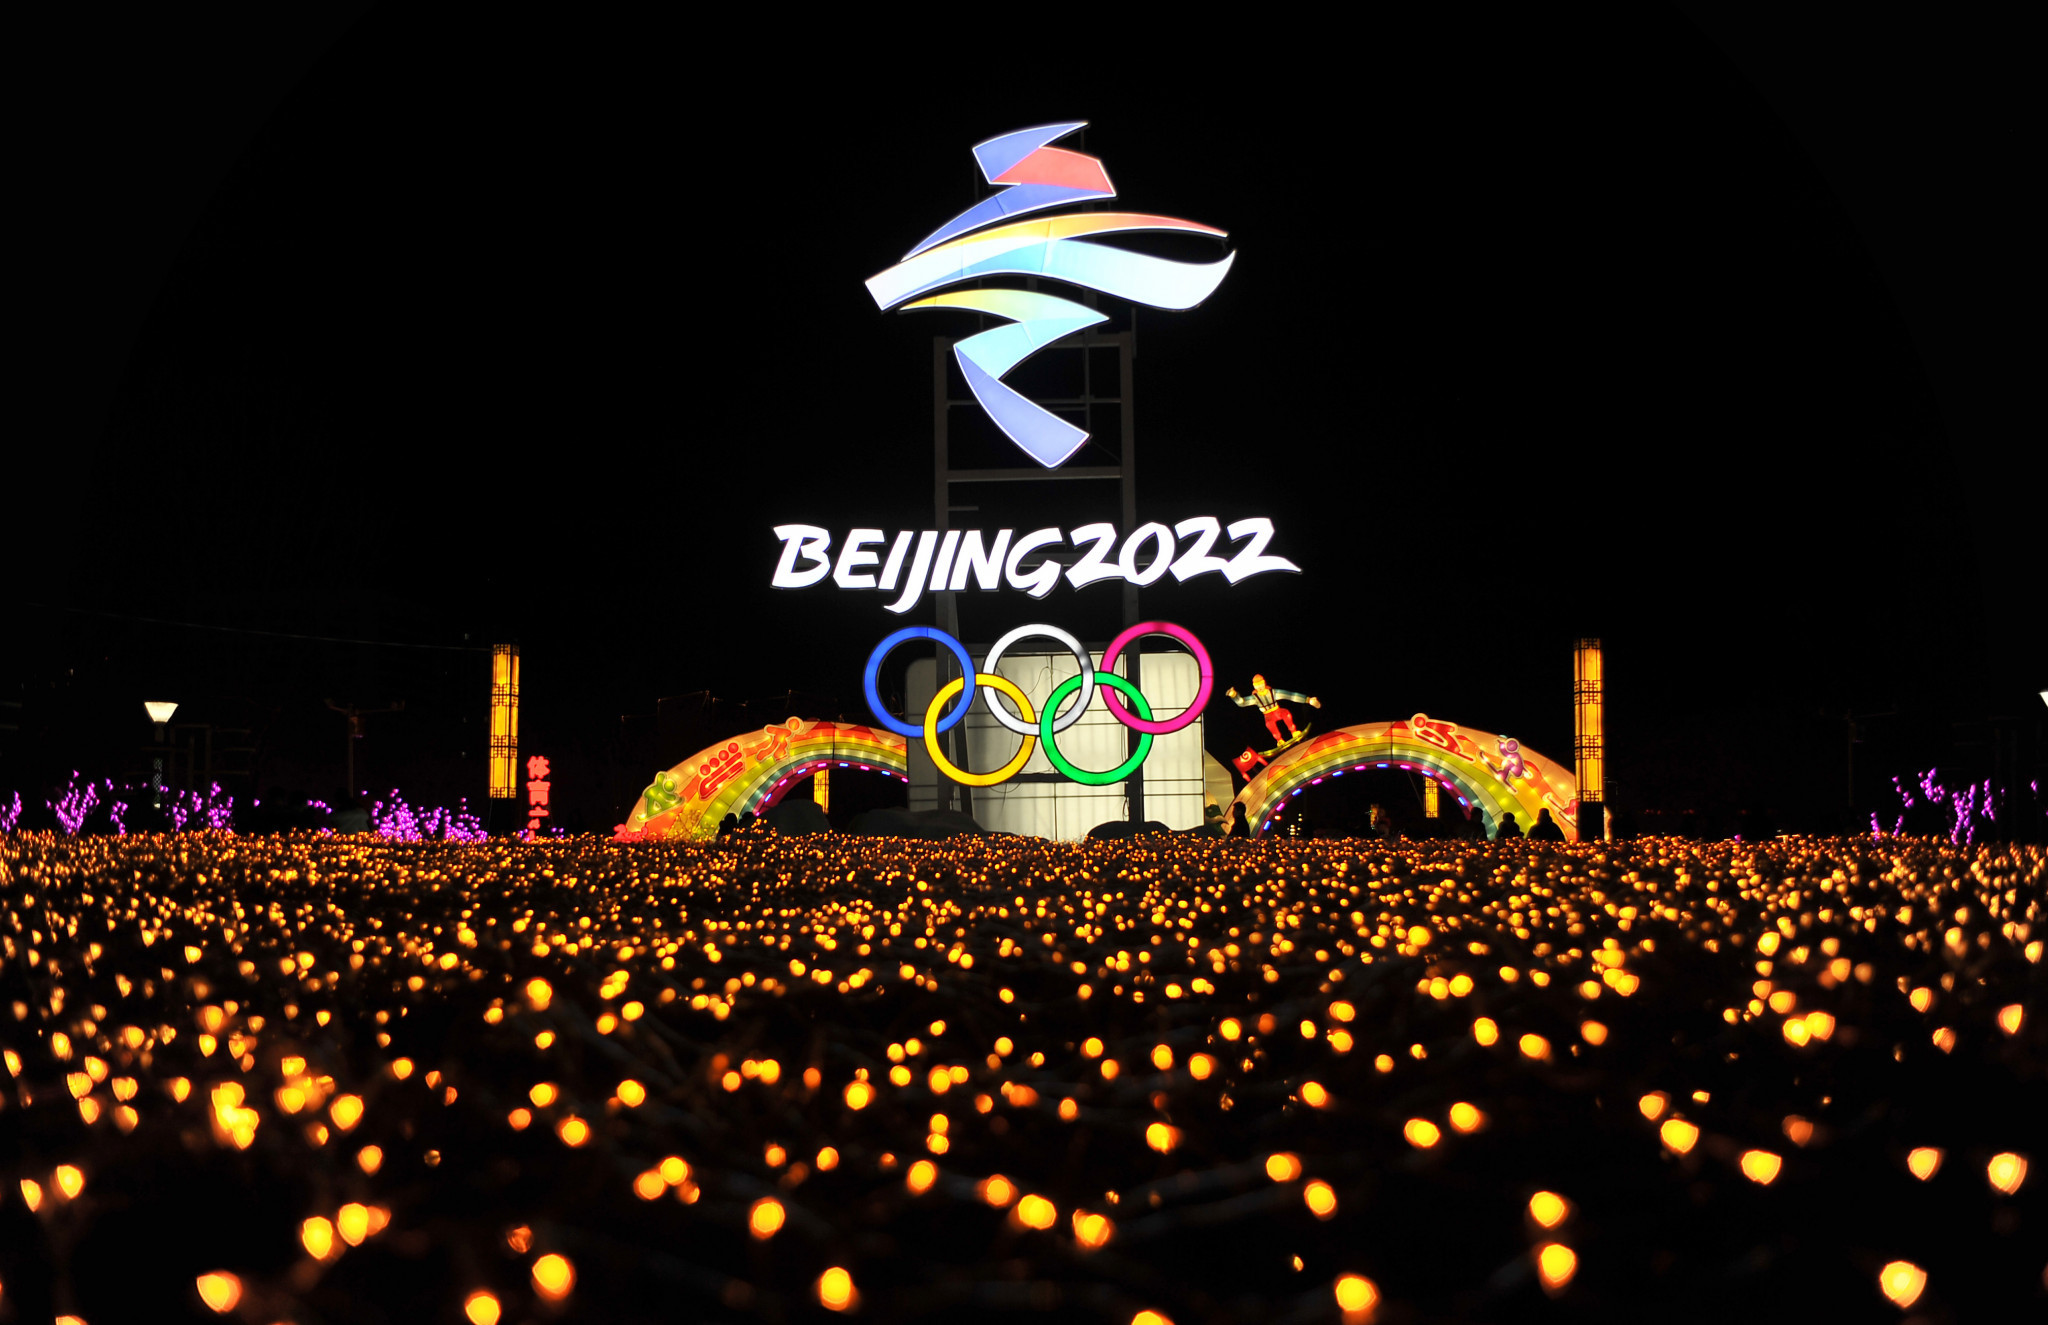 Beijing 2022 sent delegates to Pyeongchang in preparation for their Games in four years time ©Getty Images